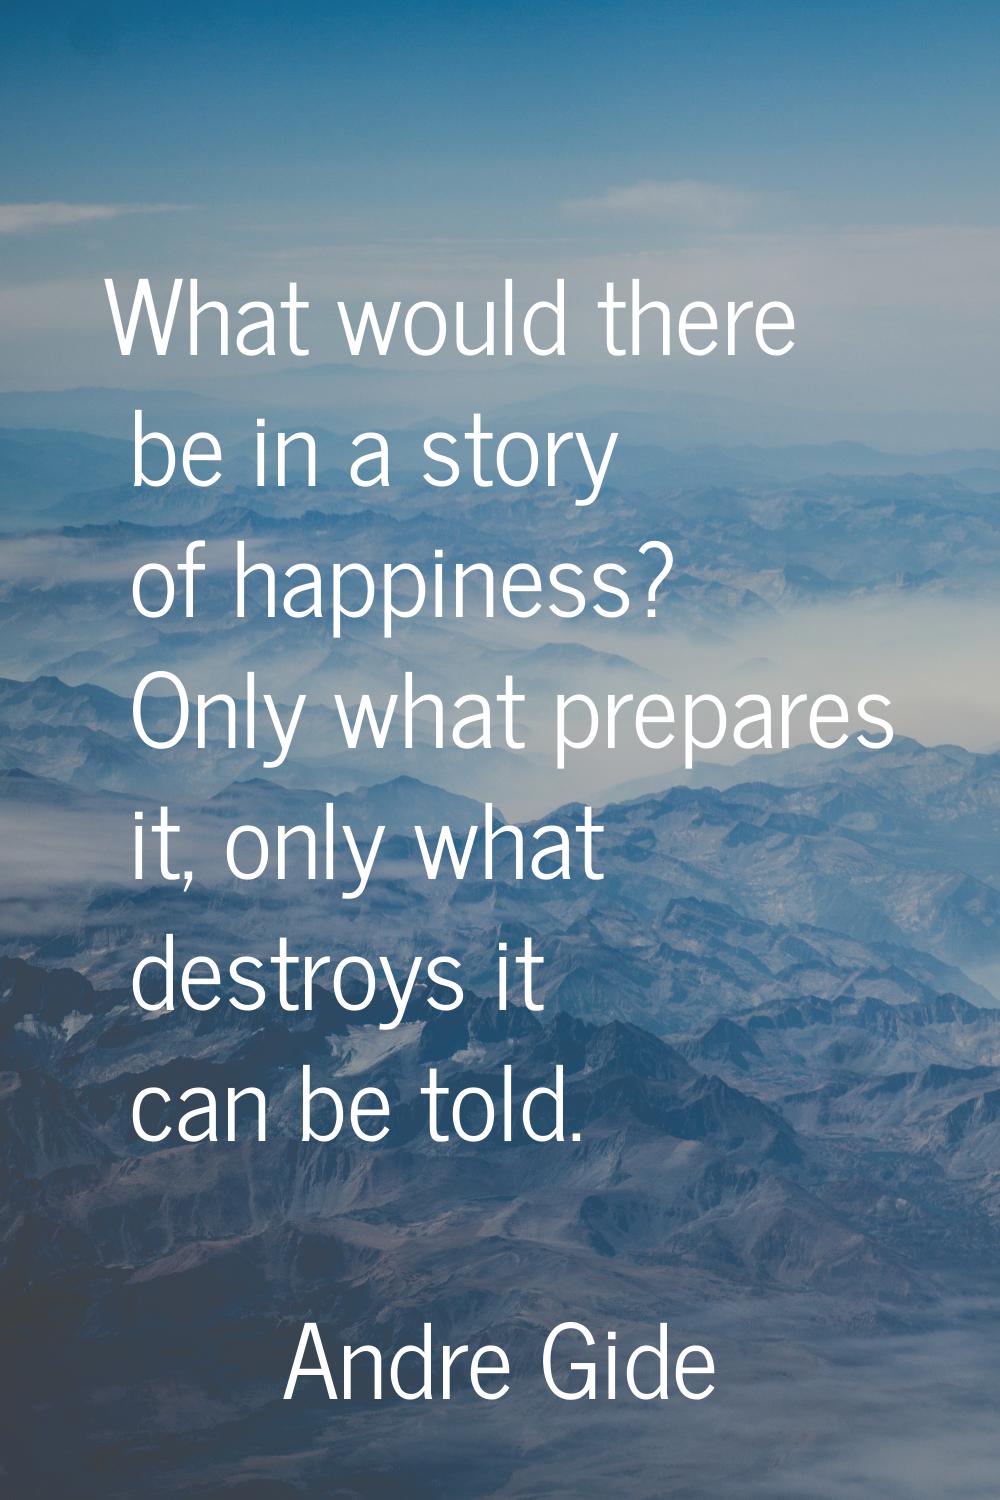 What would there be in a story of happiness? Only what prepares it, only what destroys it can be to